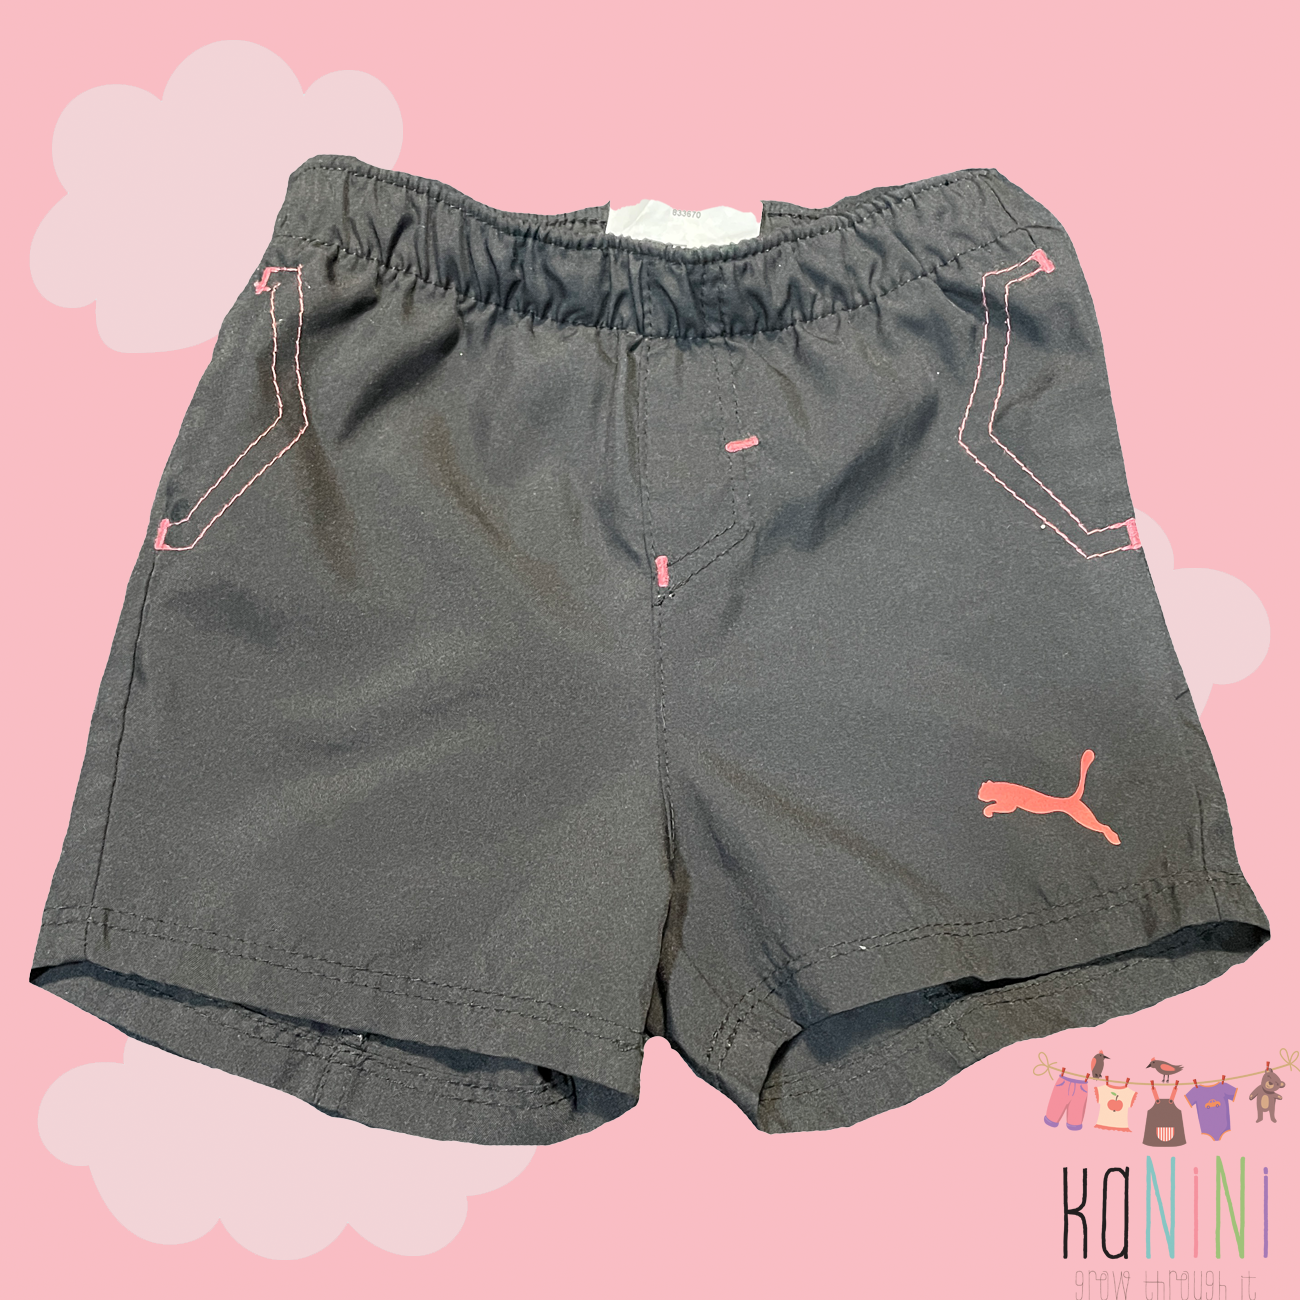 Featured image for “Puma 3 - 6 Months Girls Black Sports Shorts”